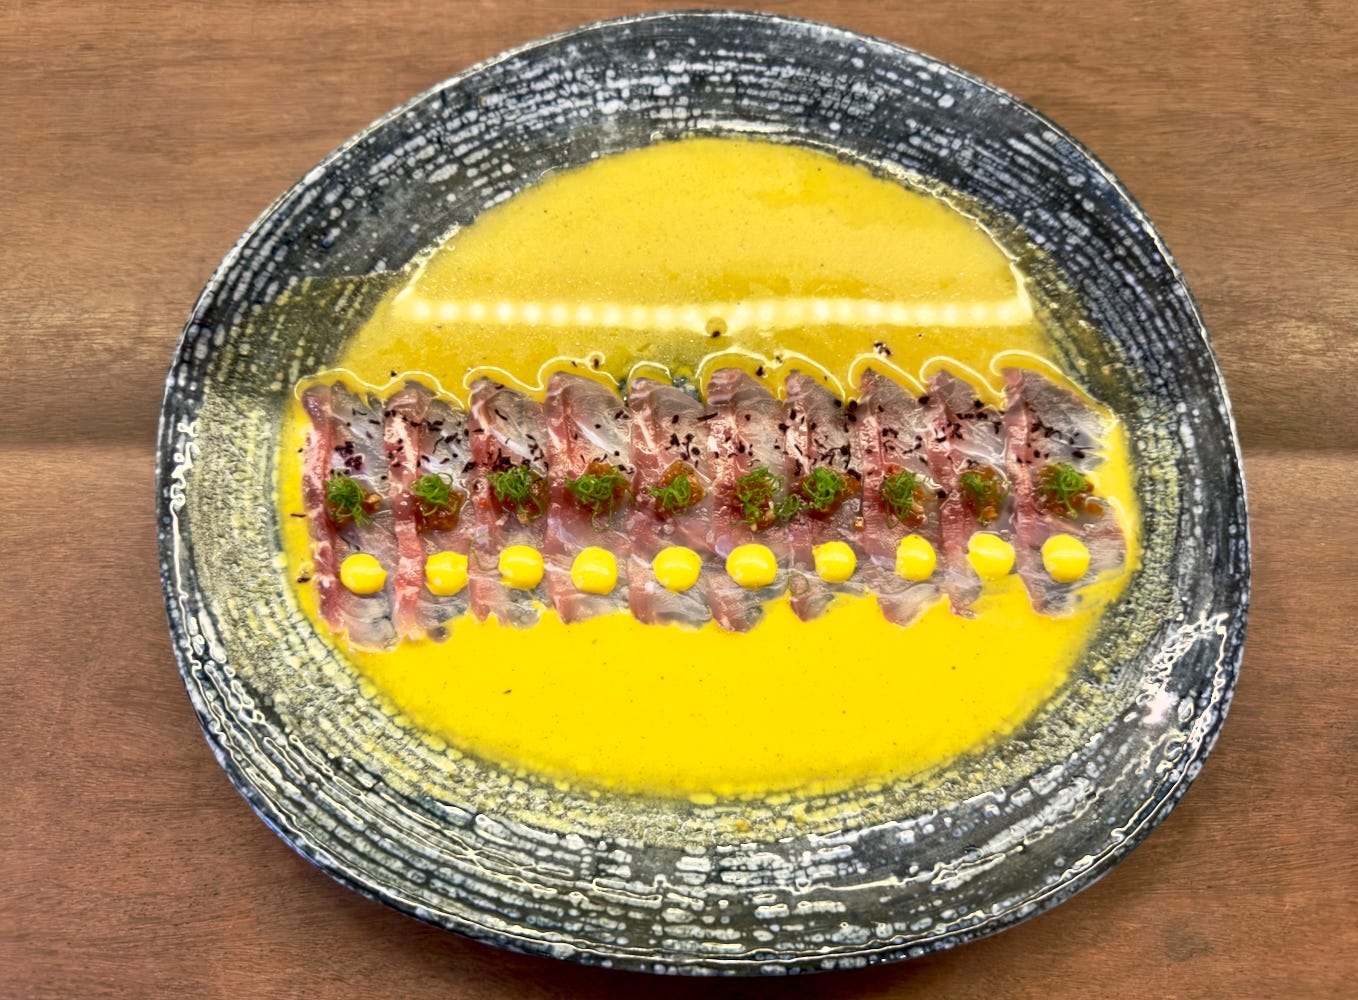 Beautiful plate of tiradito with perfectly sliced fish in a bright sea of Peruvian yellow pepper.